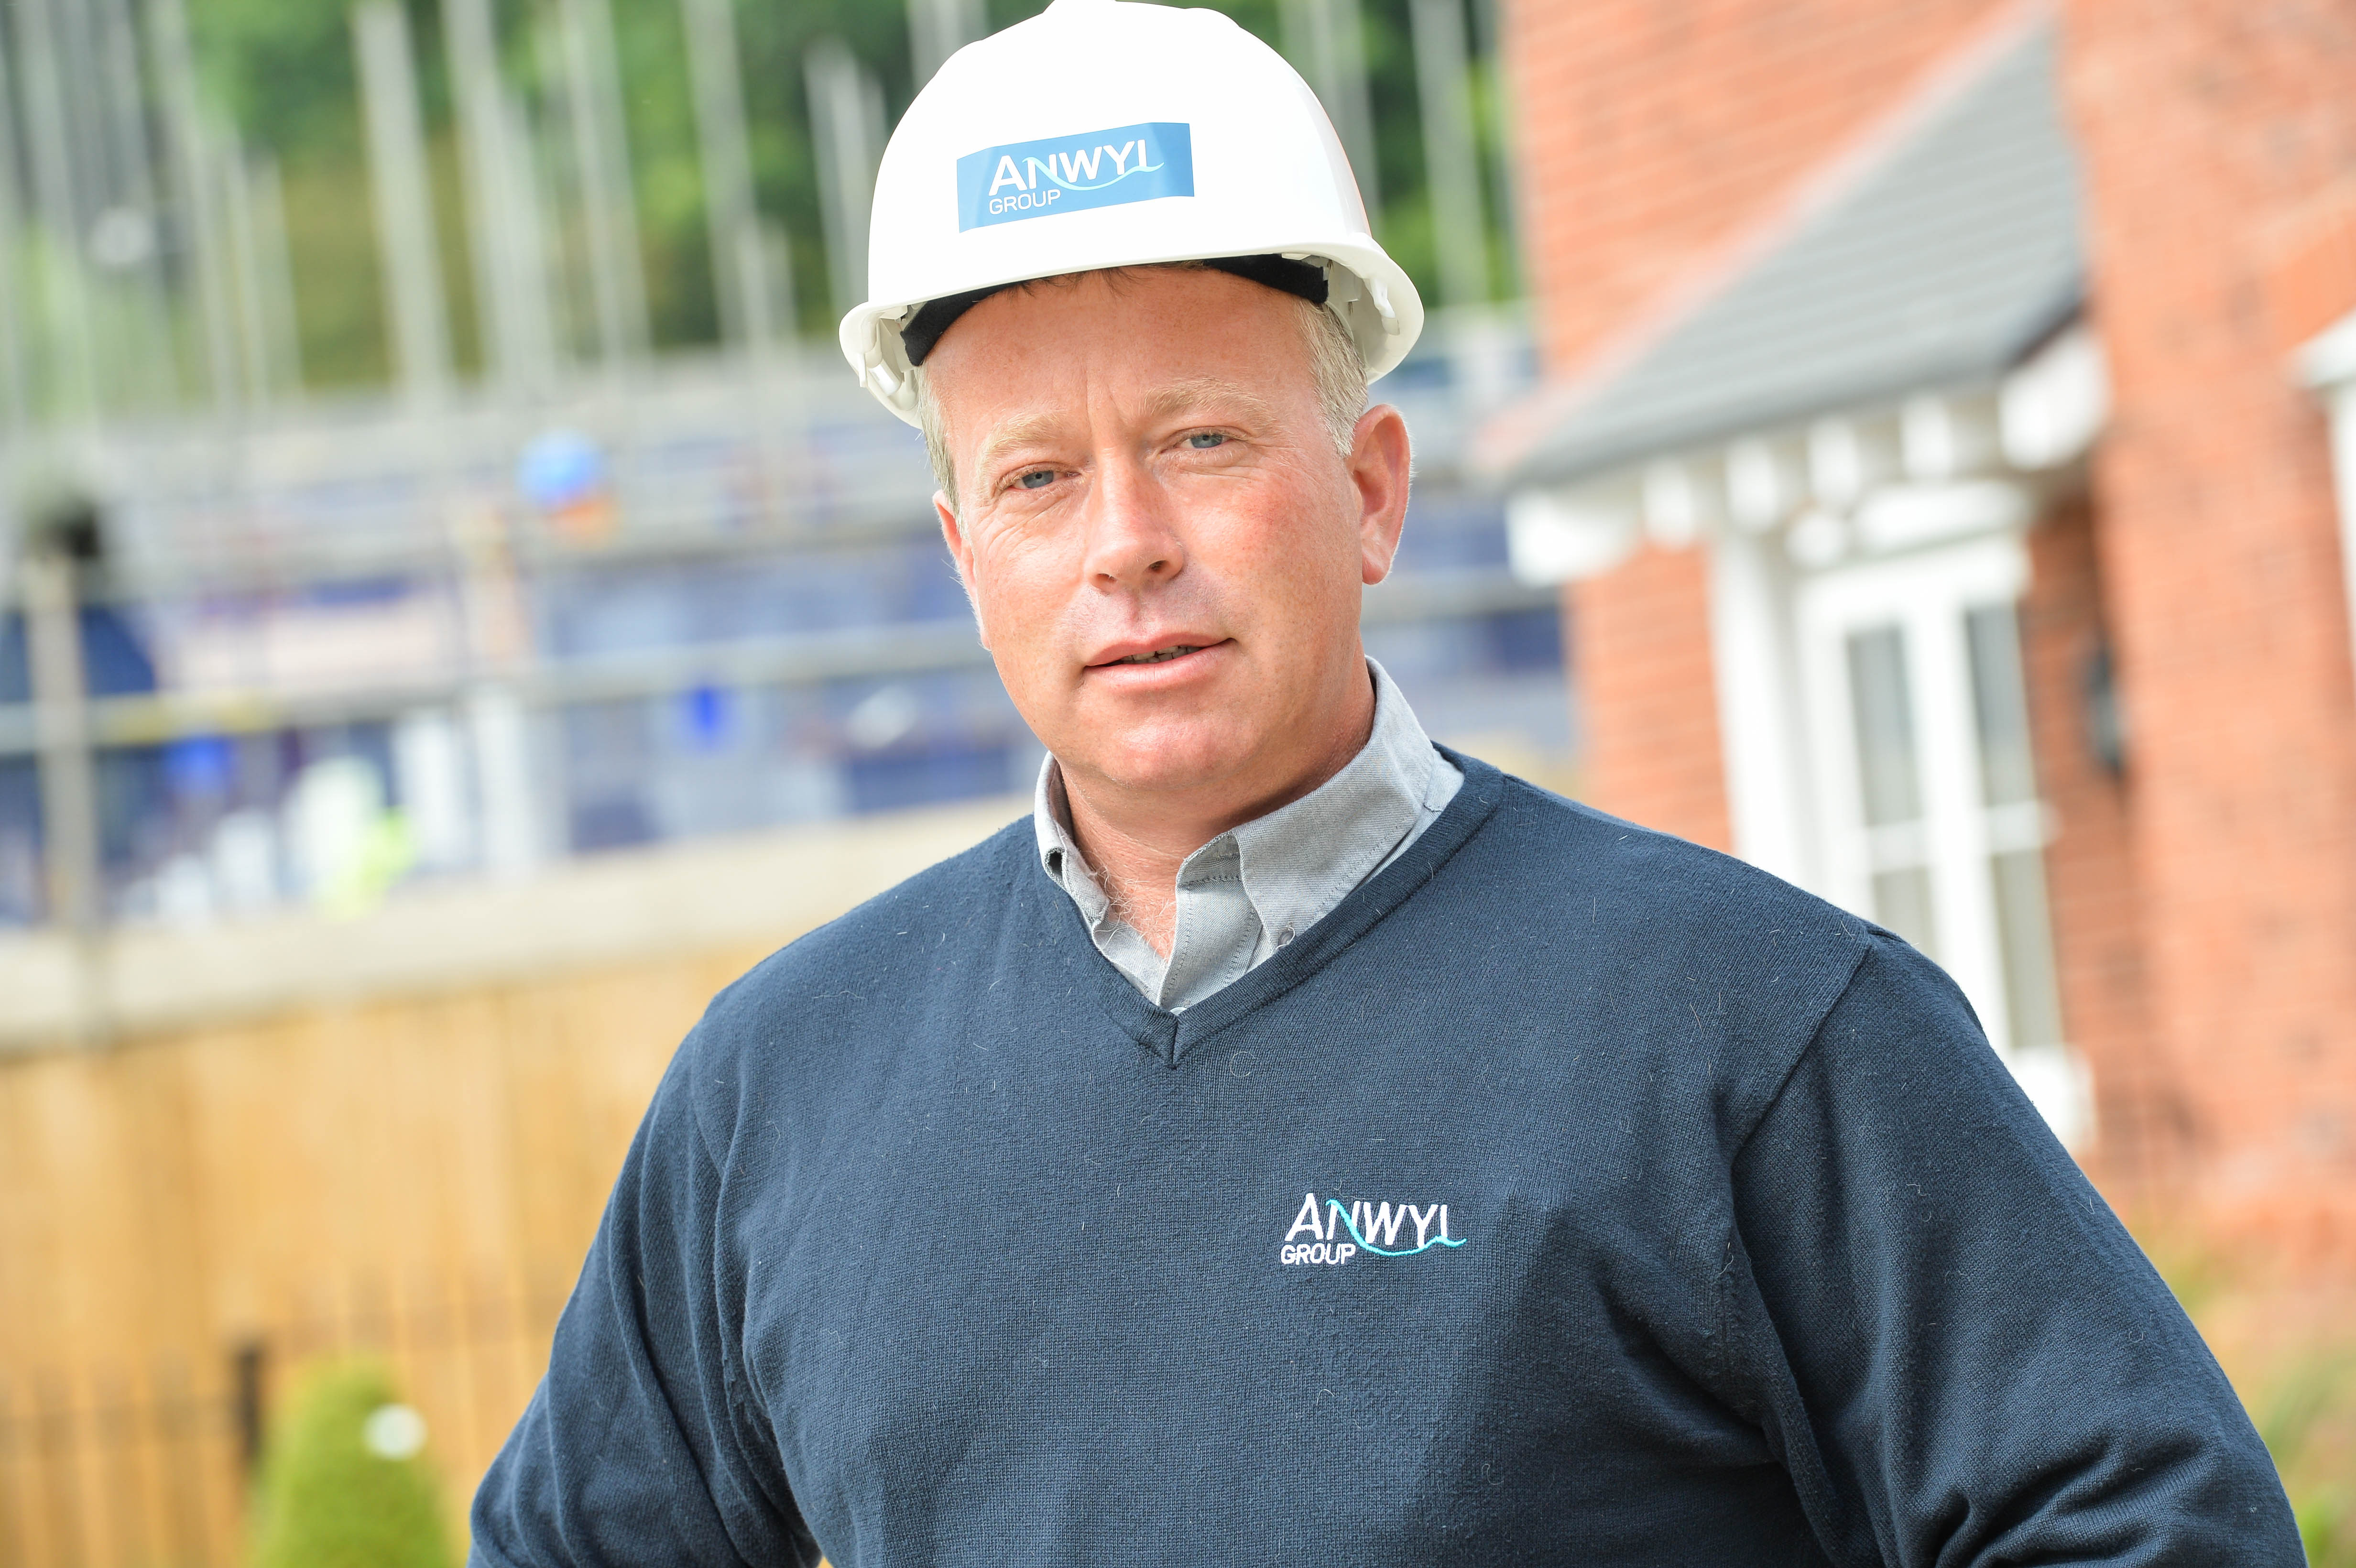 Anwyl’s George Povey is best site manager in Wales